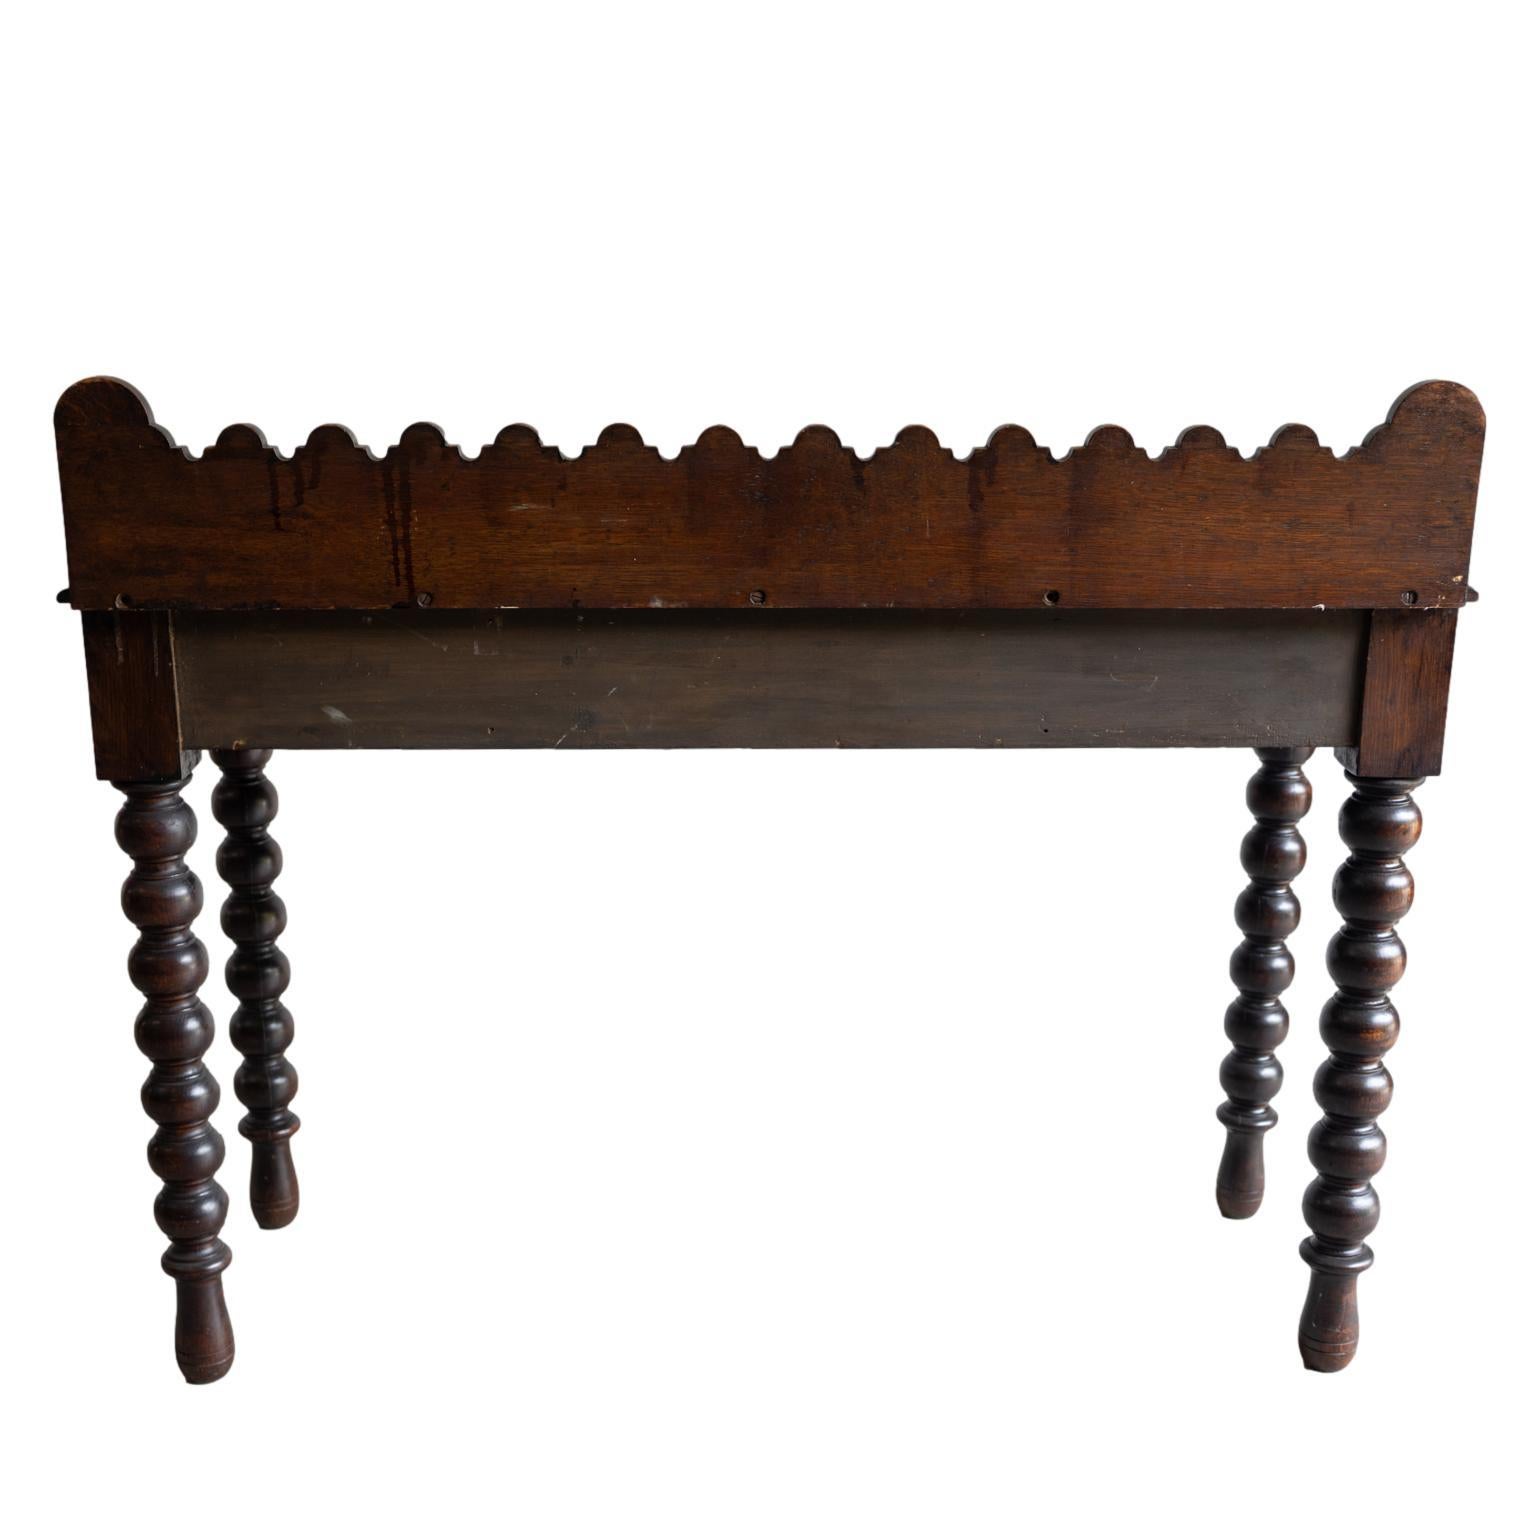 A Gothic Hand-Carved Oak Console Table, Hidden Frieze Drawer, English, ca. 1870 For Sale 1